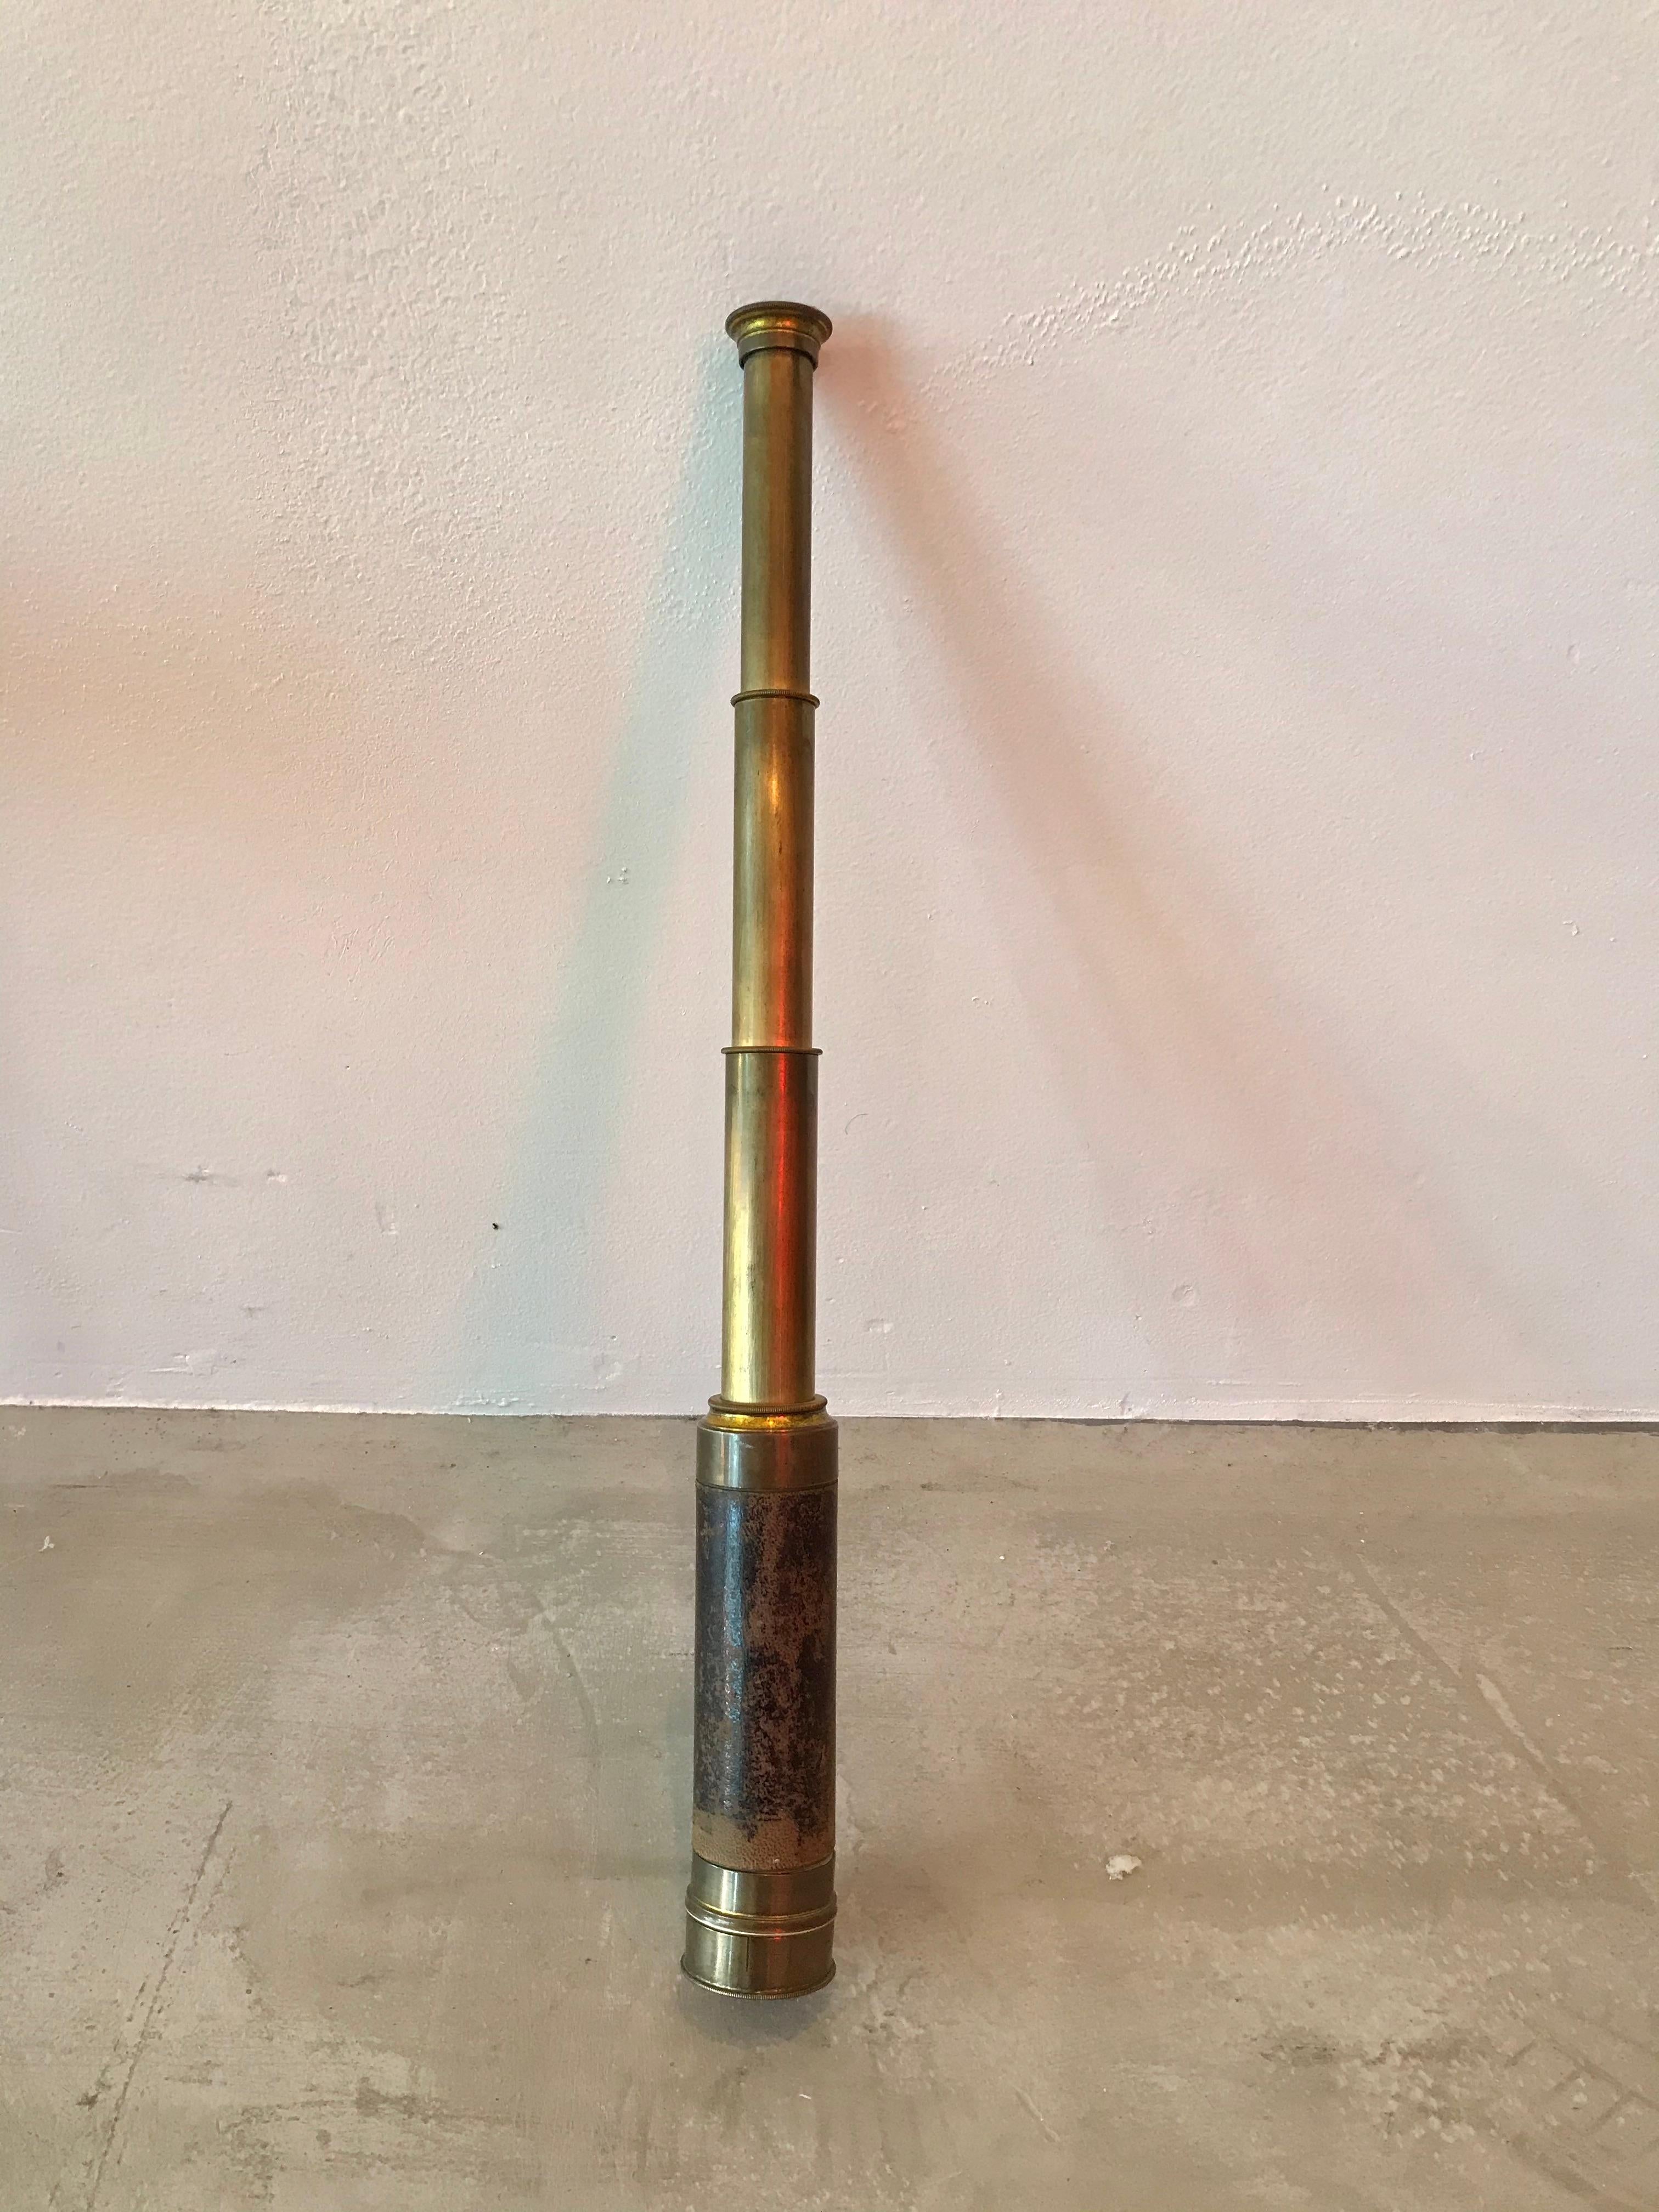 Vintage brown leather and brass 3 draw extendable hand telescope. Comes with original cap to cover glass end and brass eyepiece cover that slides in and out of place. Original leather carrying case included. Imprinted that it was made in France and